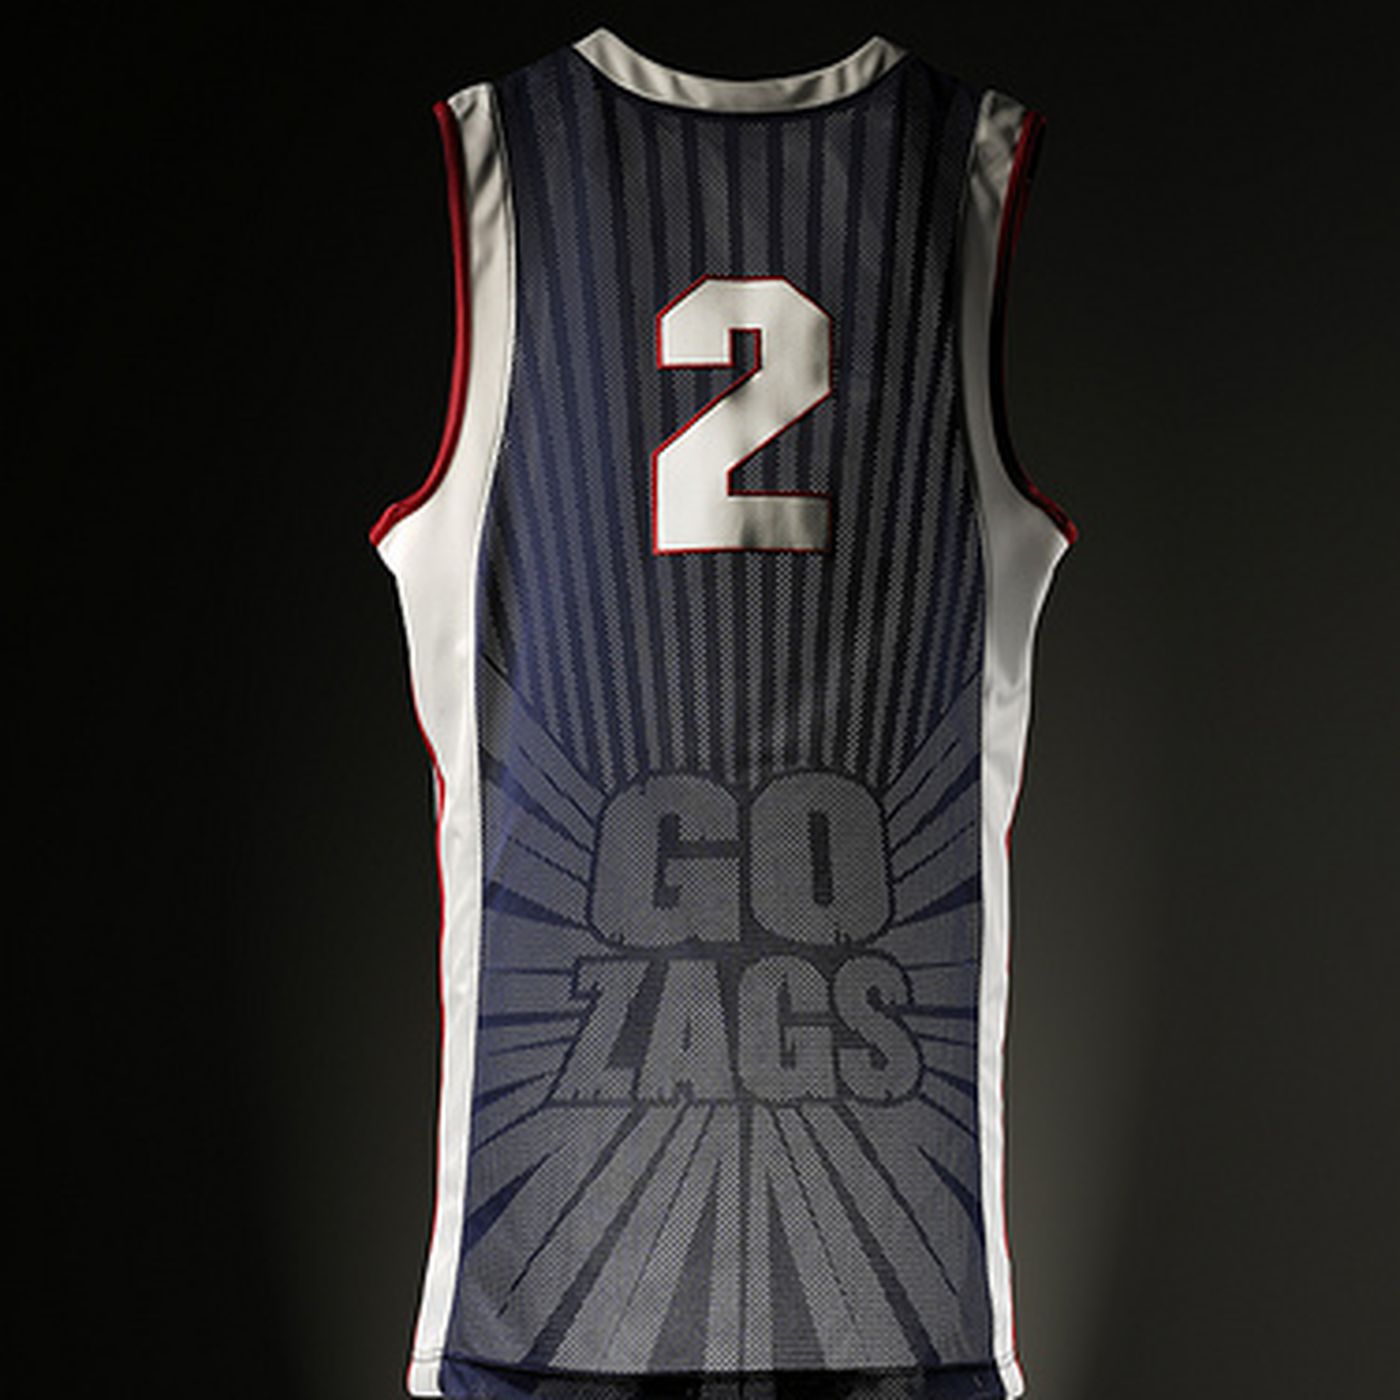 Gonzaga Jerseys Throughout the Years - The Slipper Still Fits